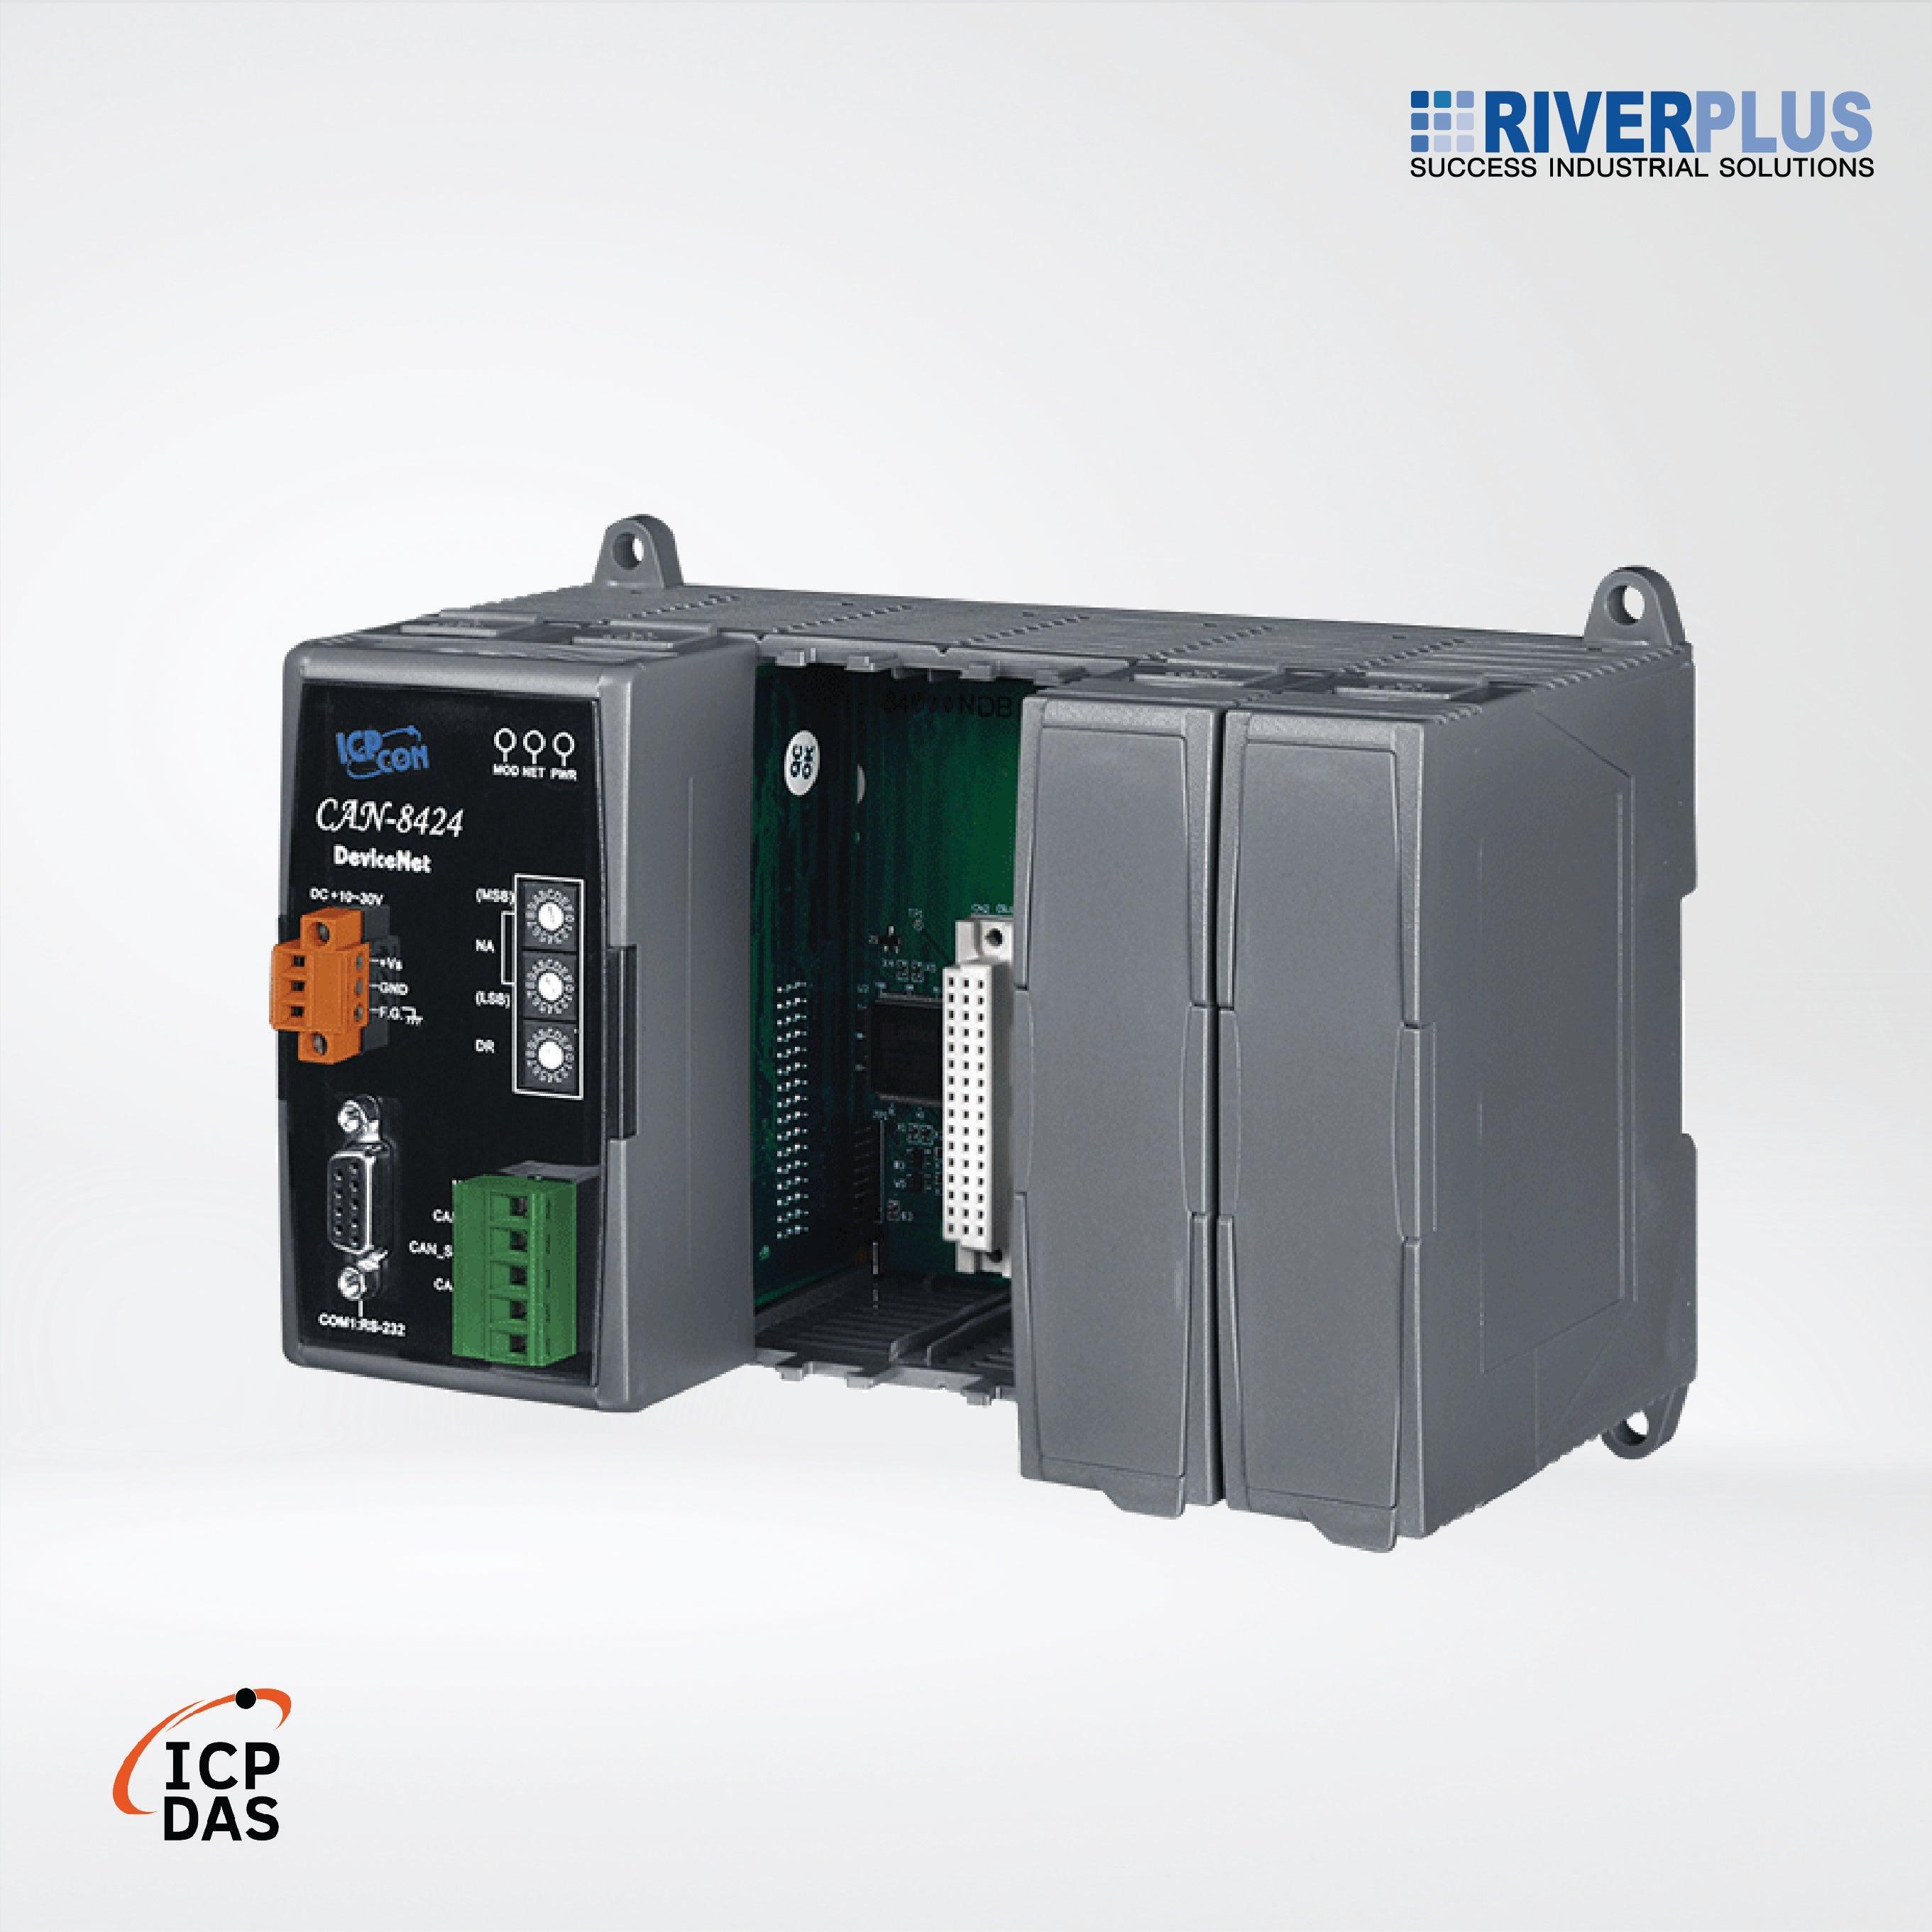 CAN-8424-G DeviceNet Remote I/O Unit with 4 I/O Slots - Riverplus